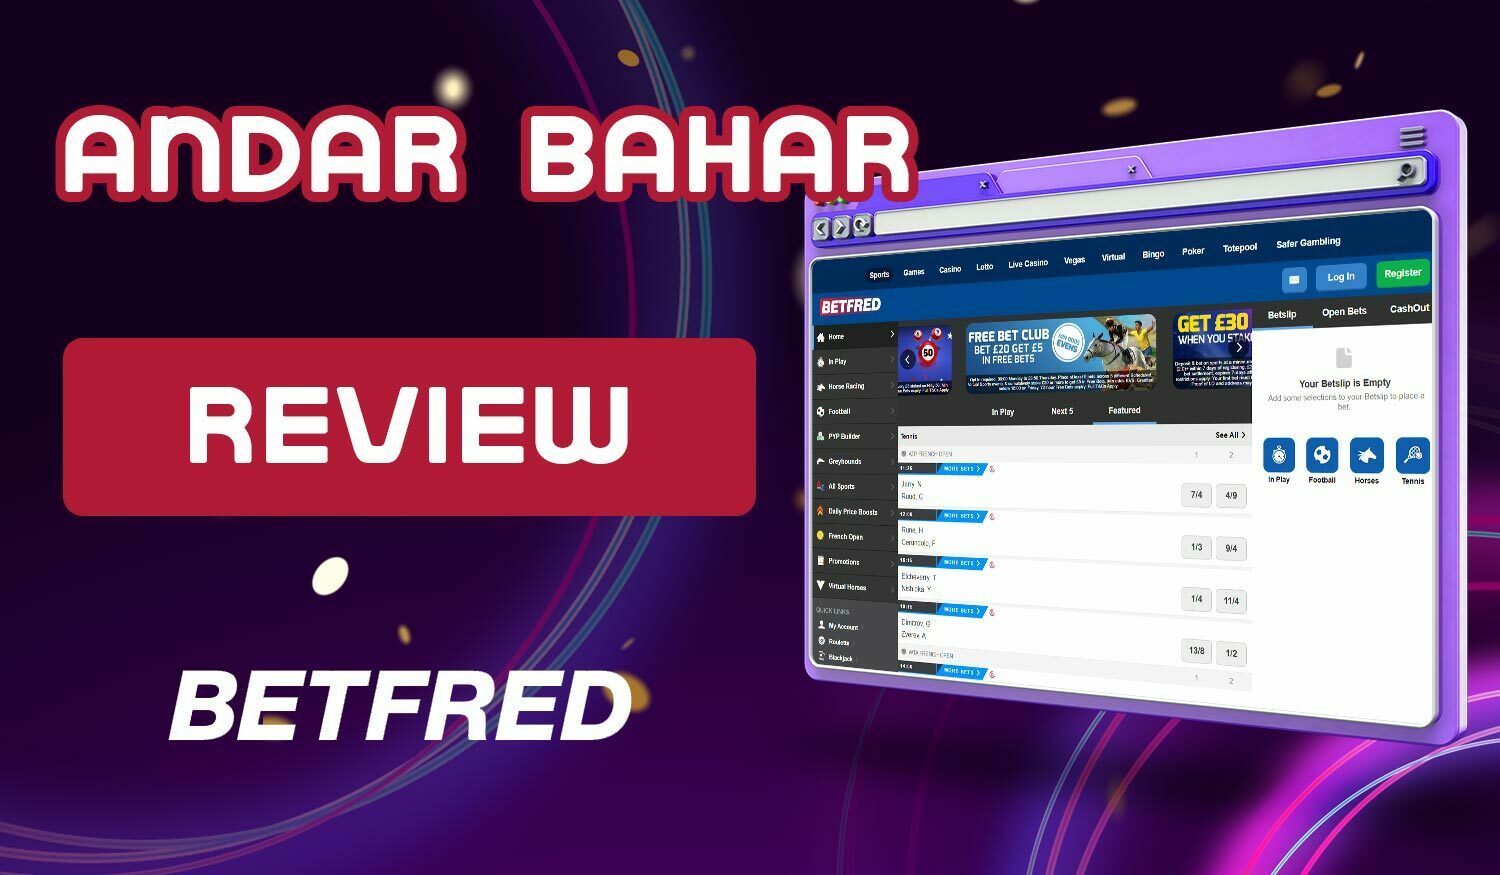 Detailed review of the bookmaker Betfred on Andar Bahars for players from India